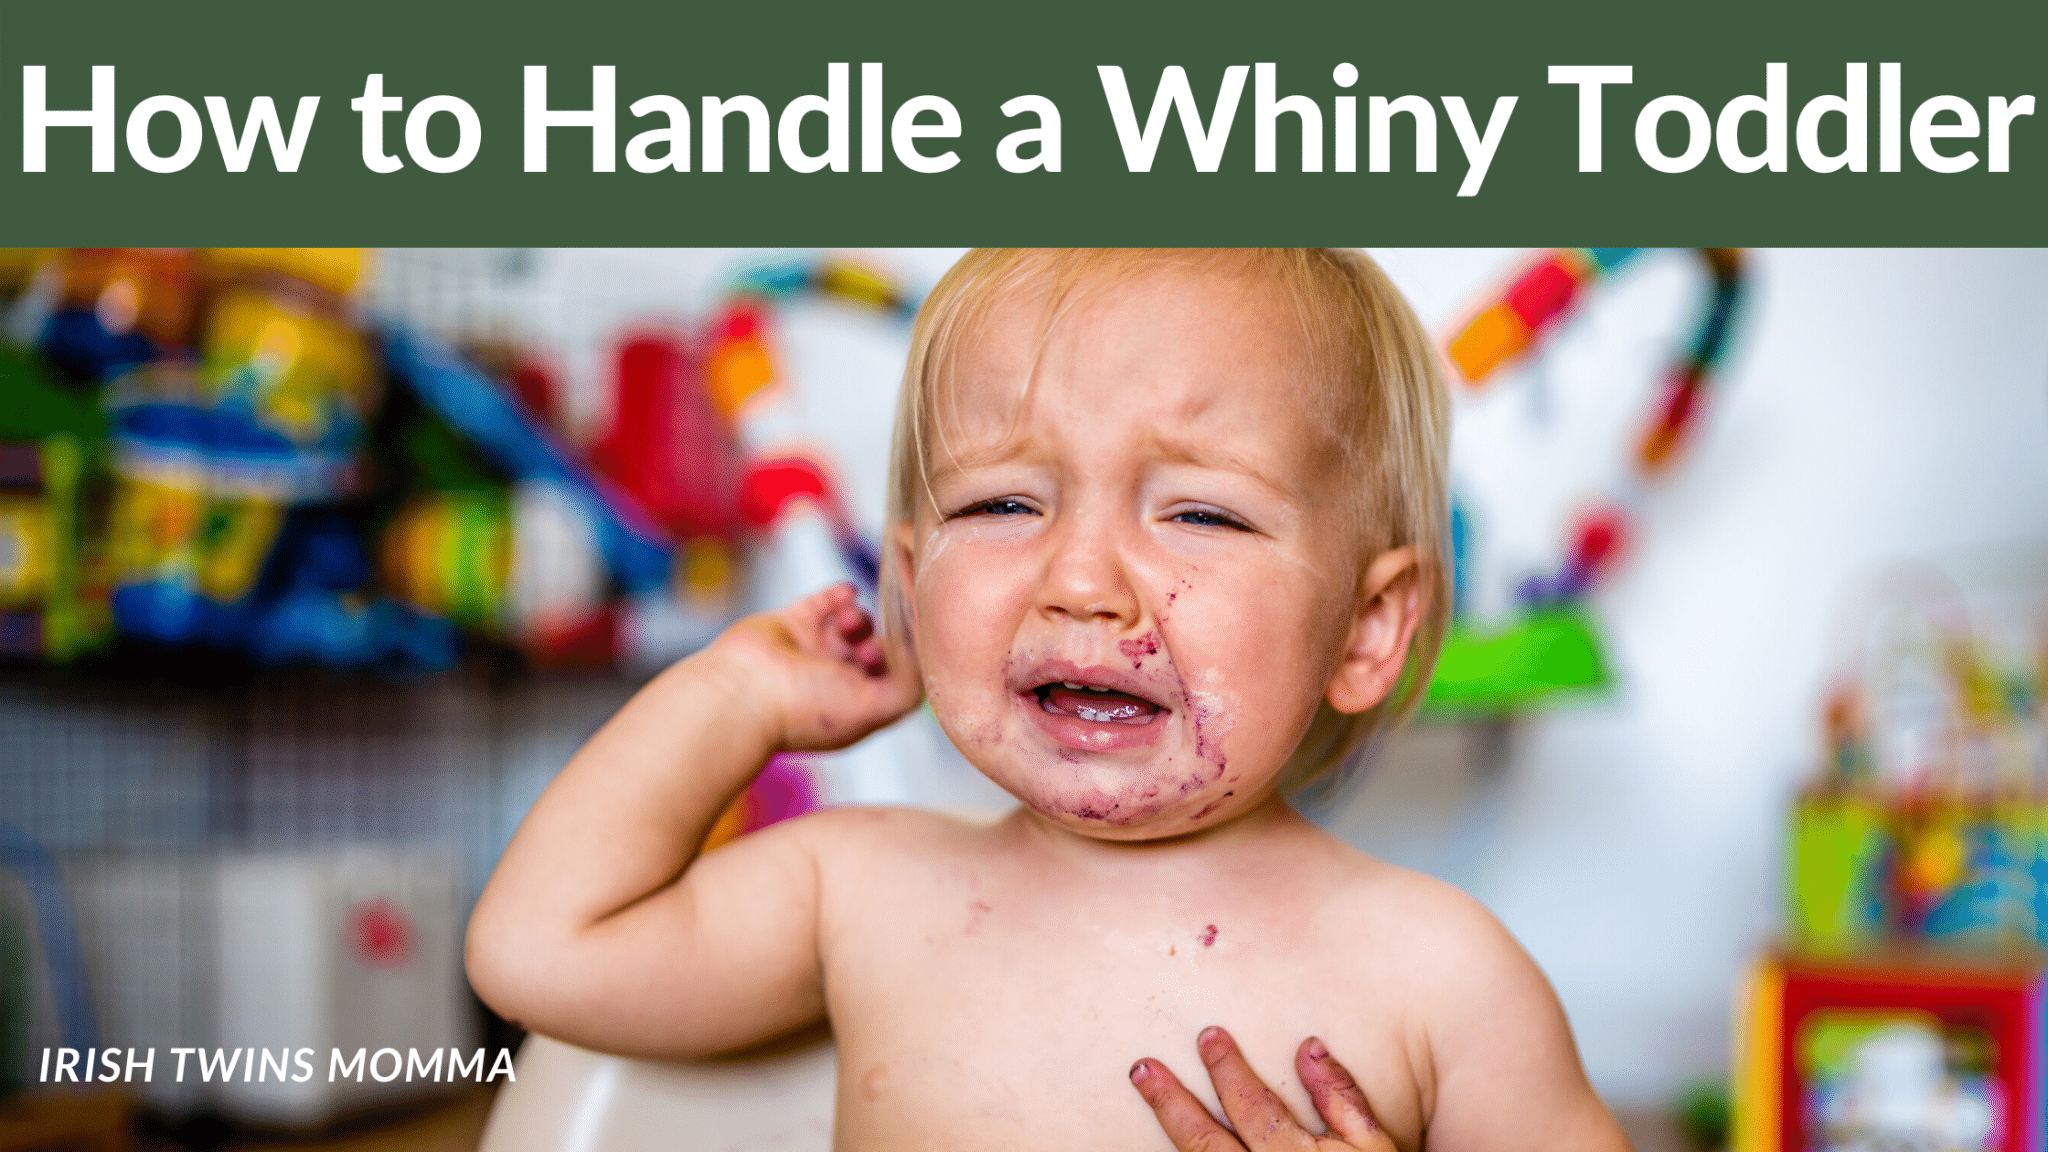 How to handle a whiny toddler